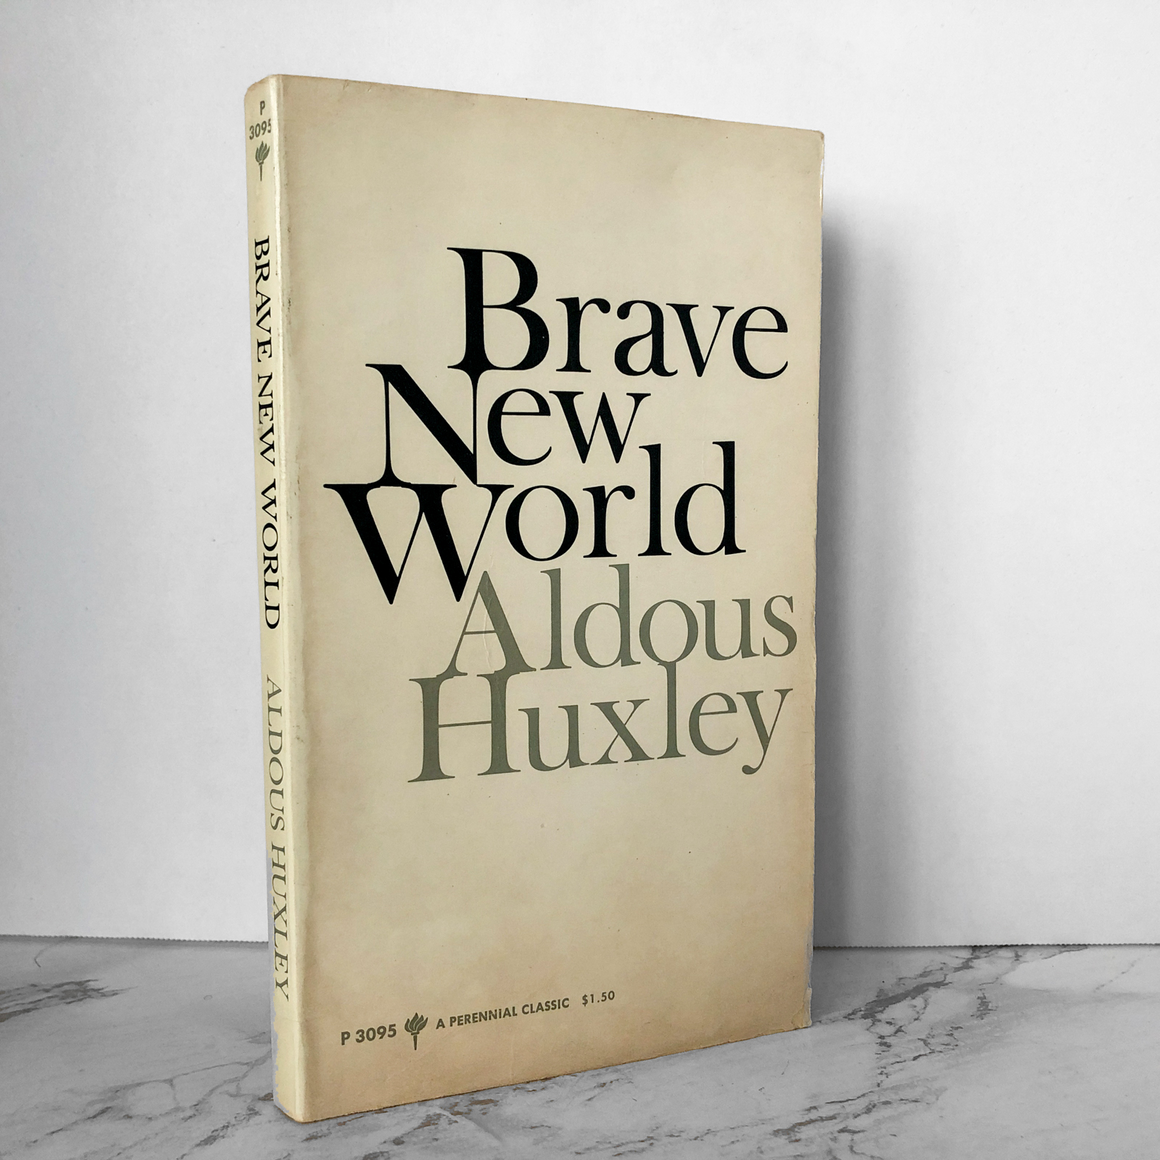 brave new world book sold in store